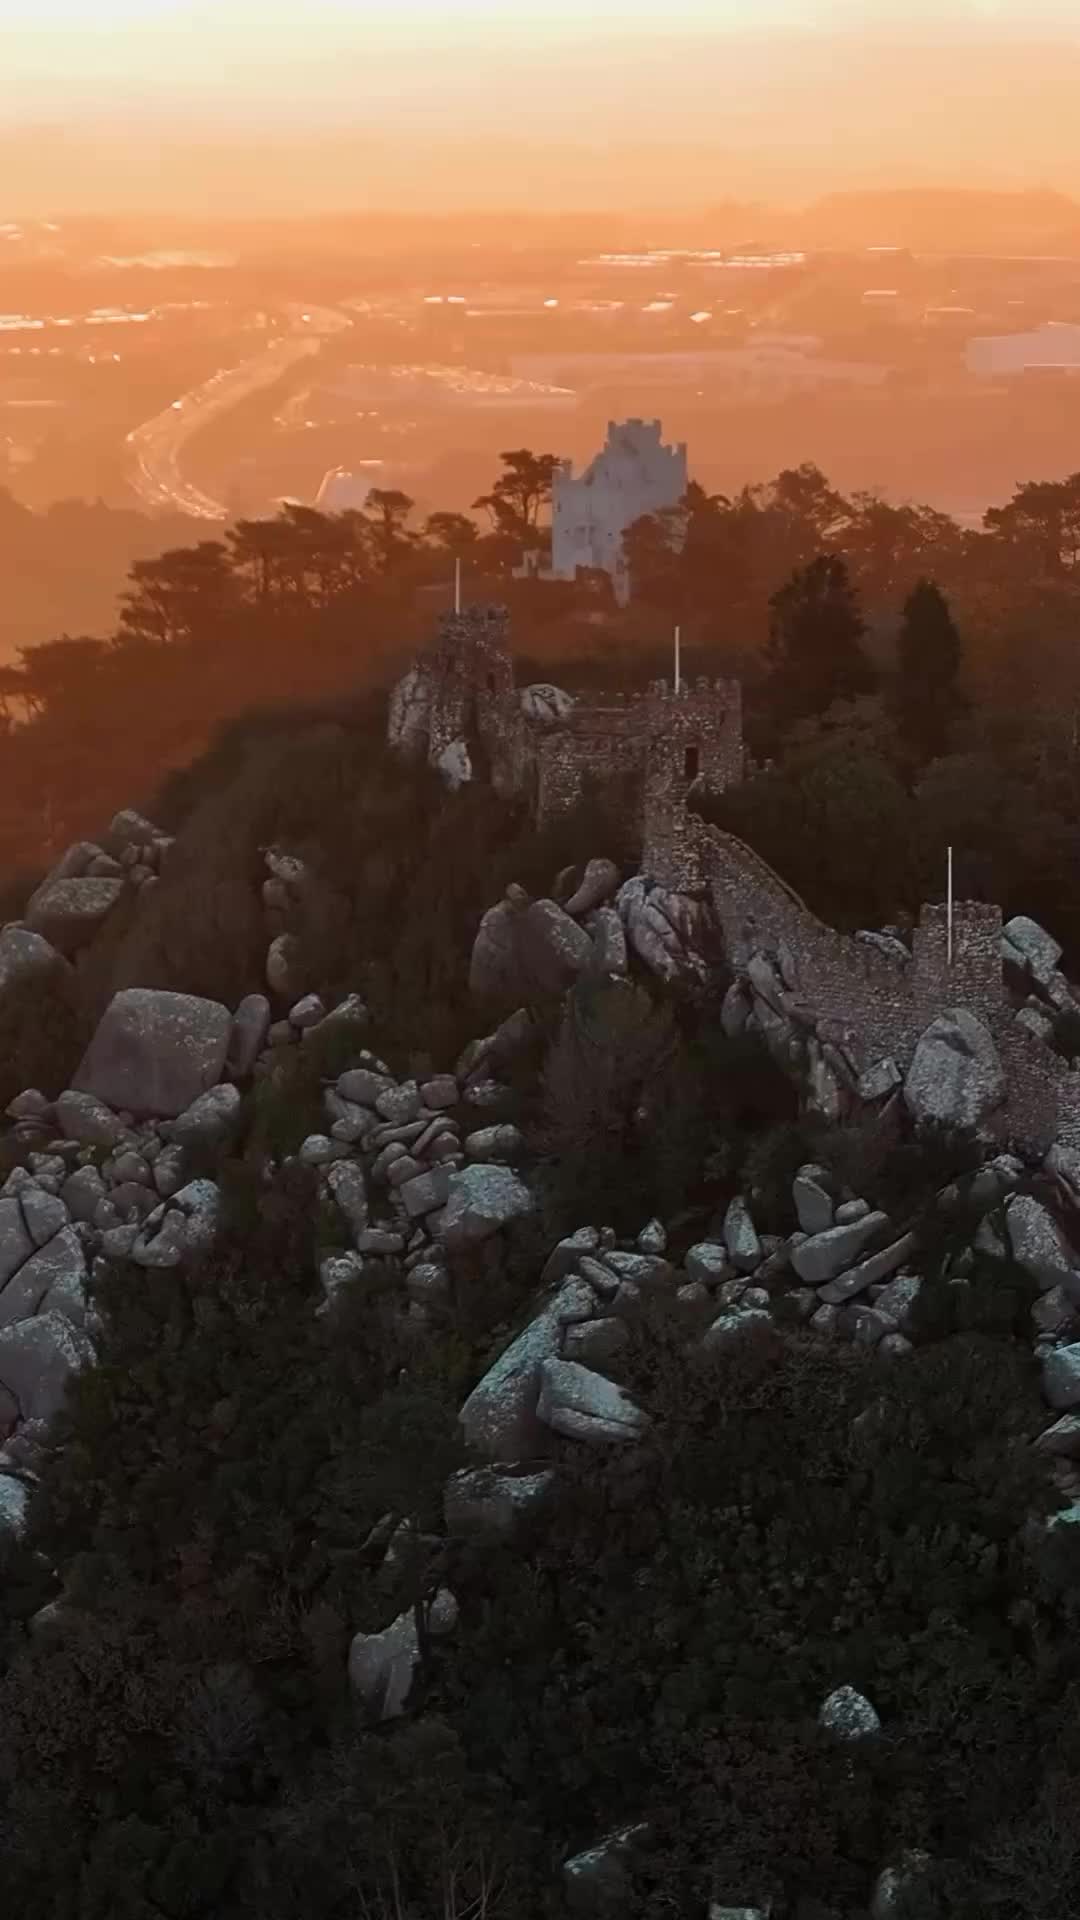 Sunrise Over Sintra's Castles in Portugal